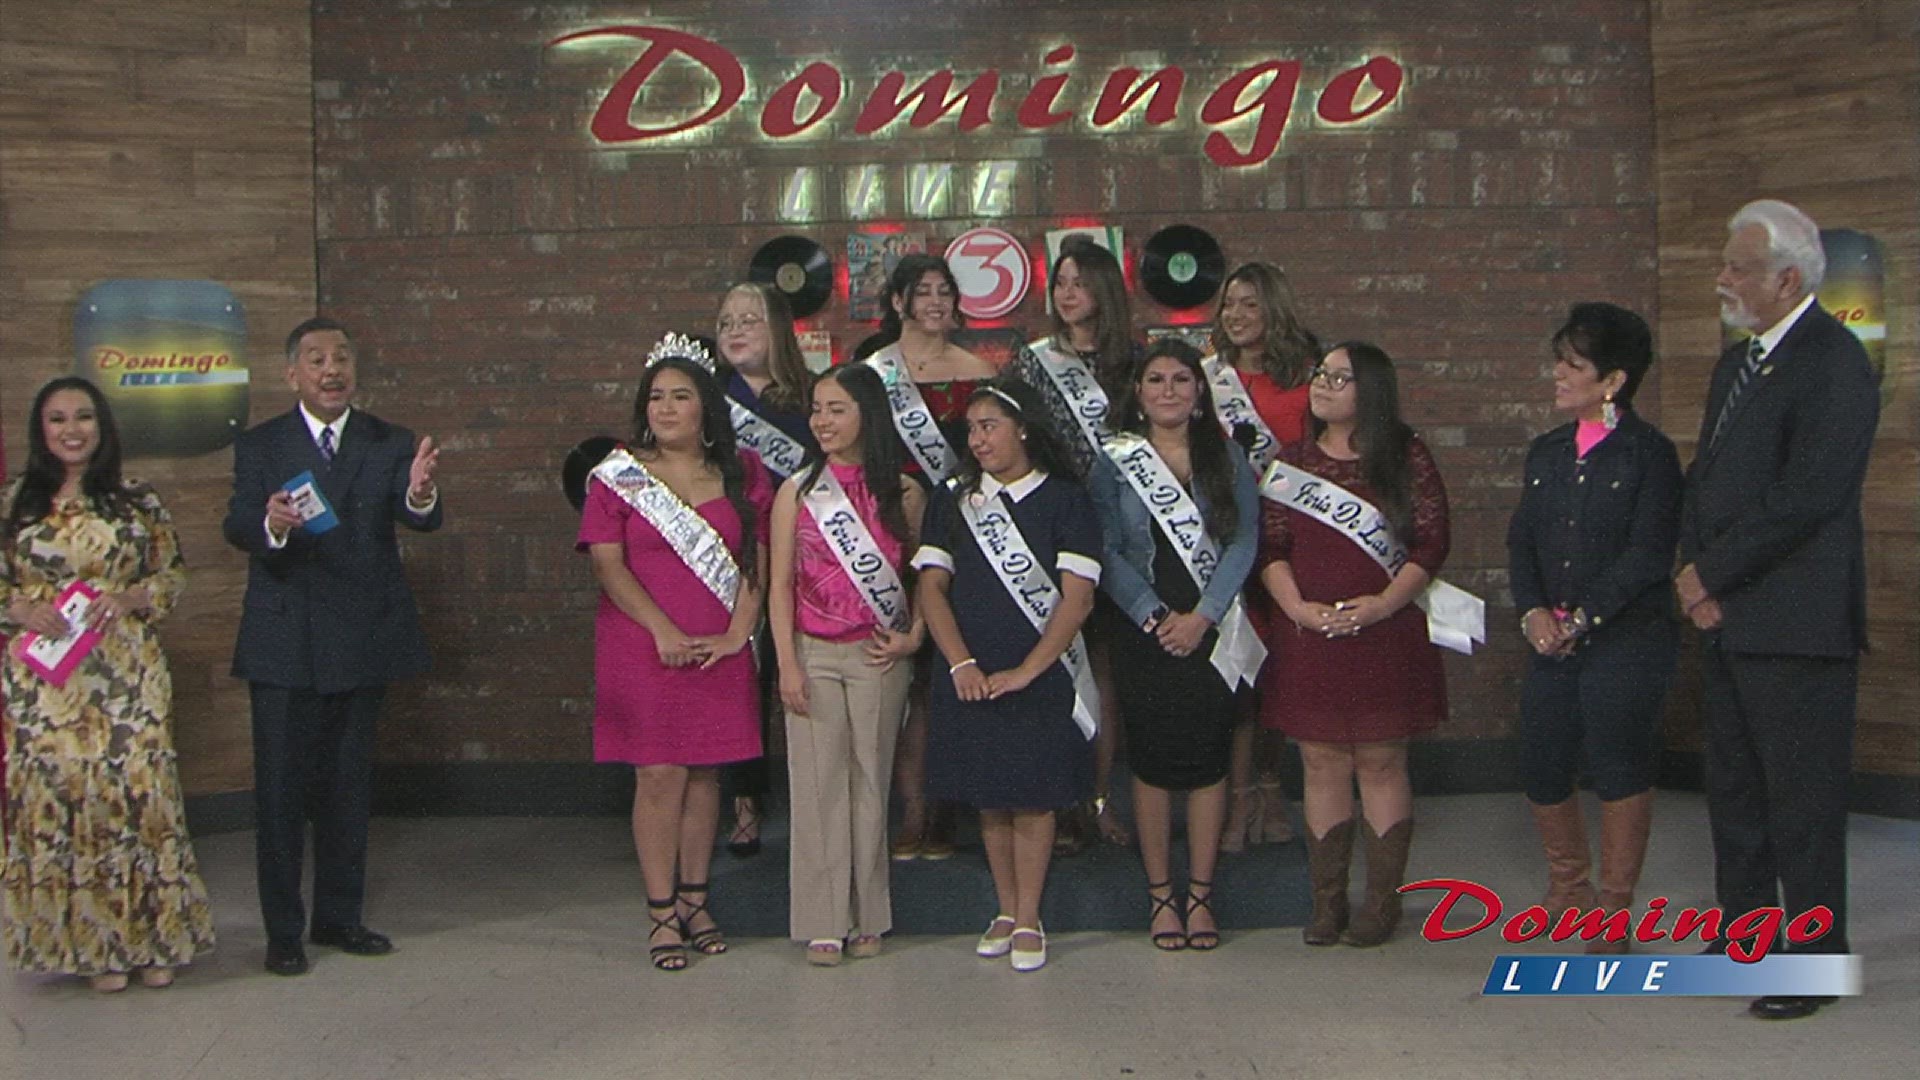 The ladies of the 64th Annual Feria de las Flores leadership program joined us live to introduce themselves and discuss what they're looking forward to.